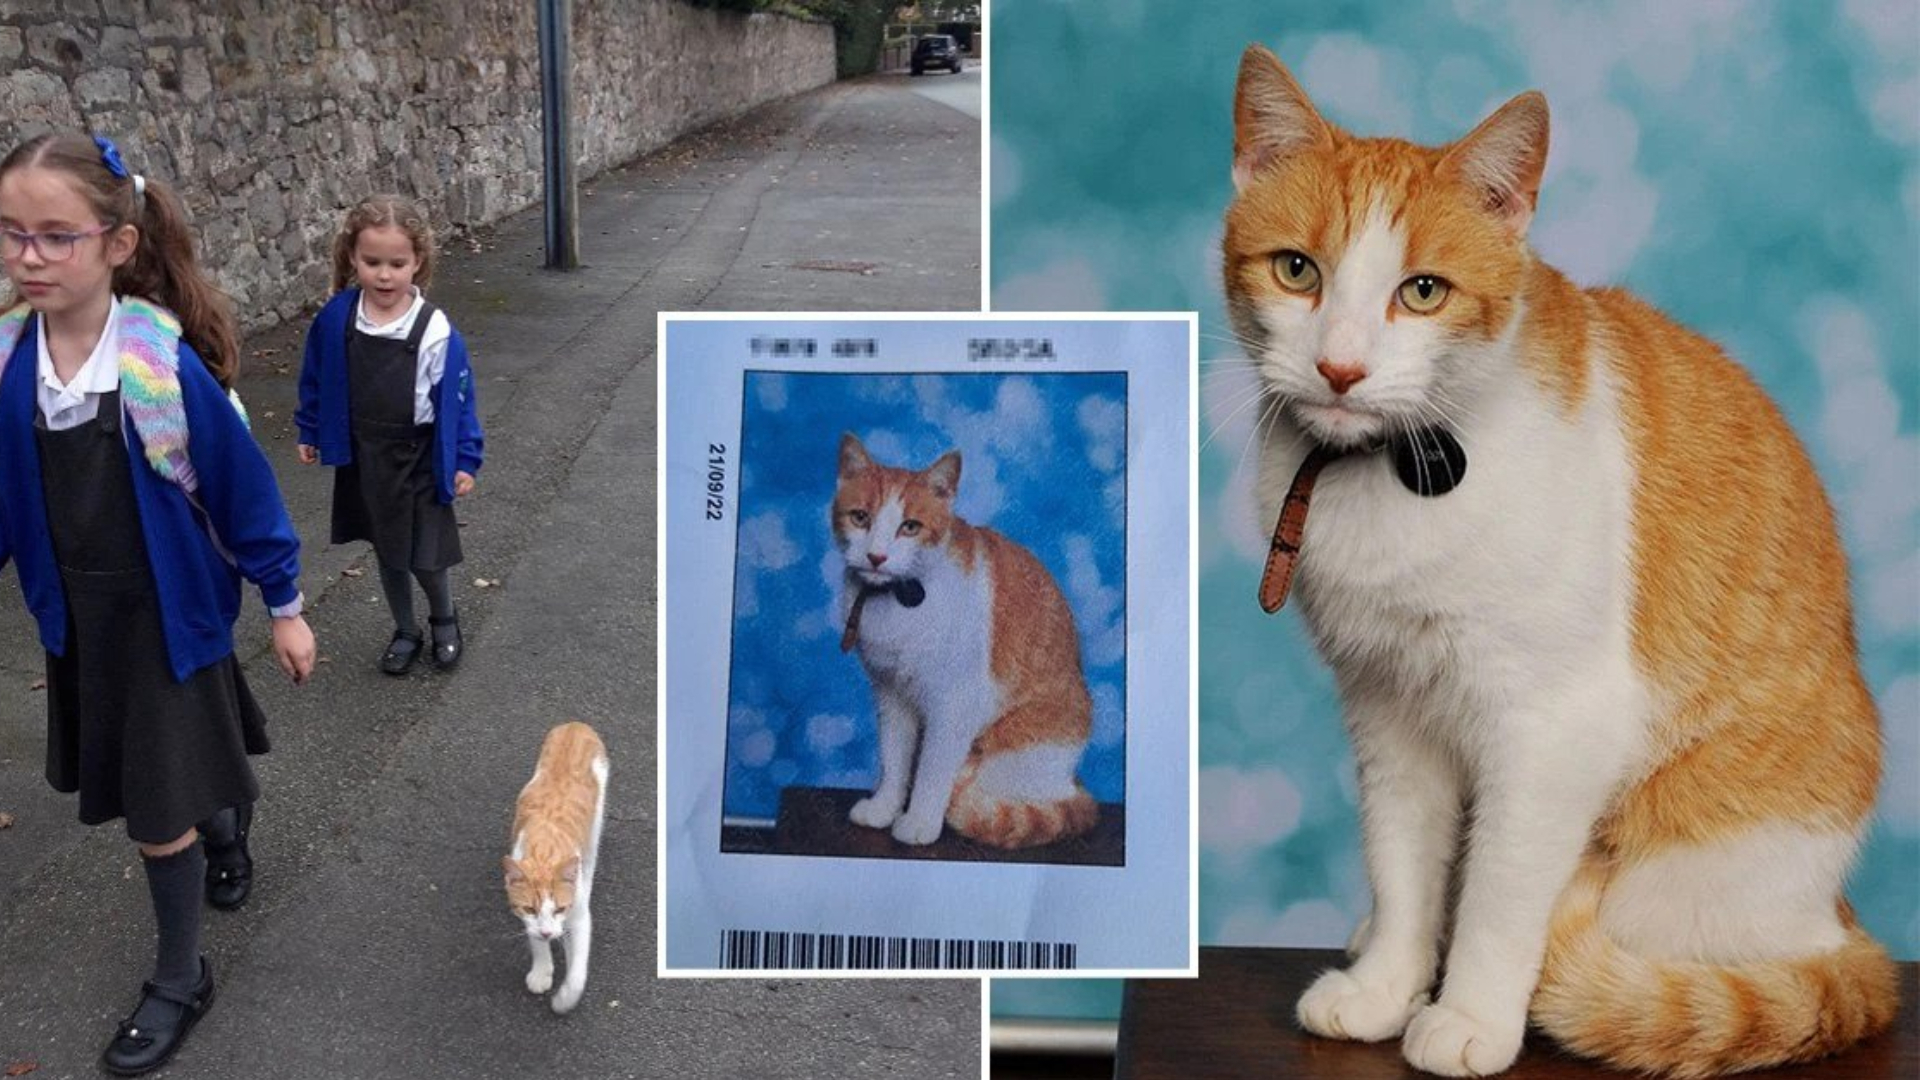 Meet the cat that crashed his sisters' school picture day